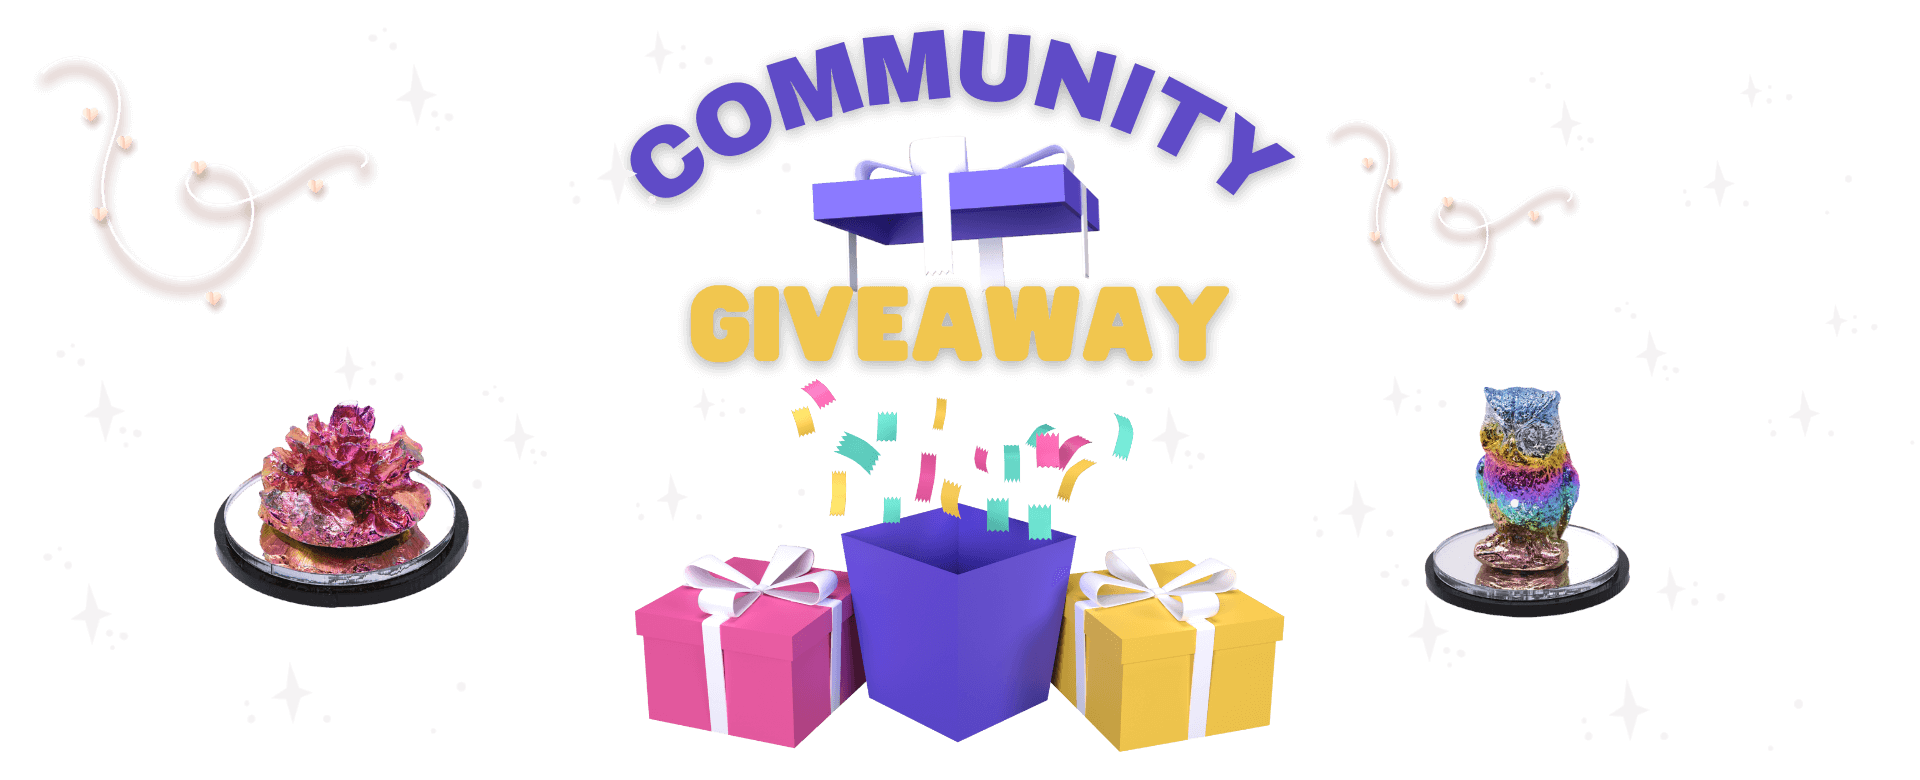 Community giveaway 1